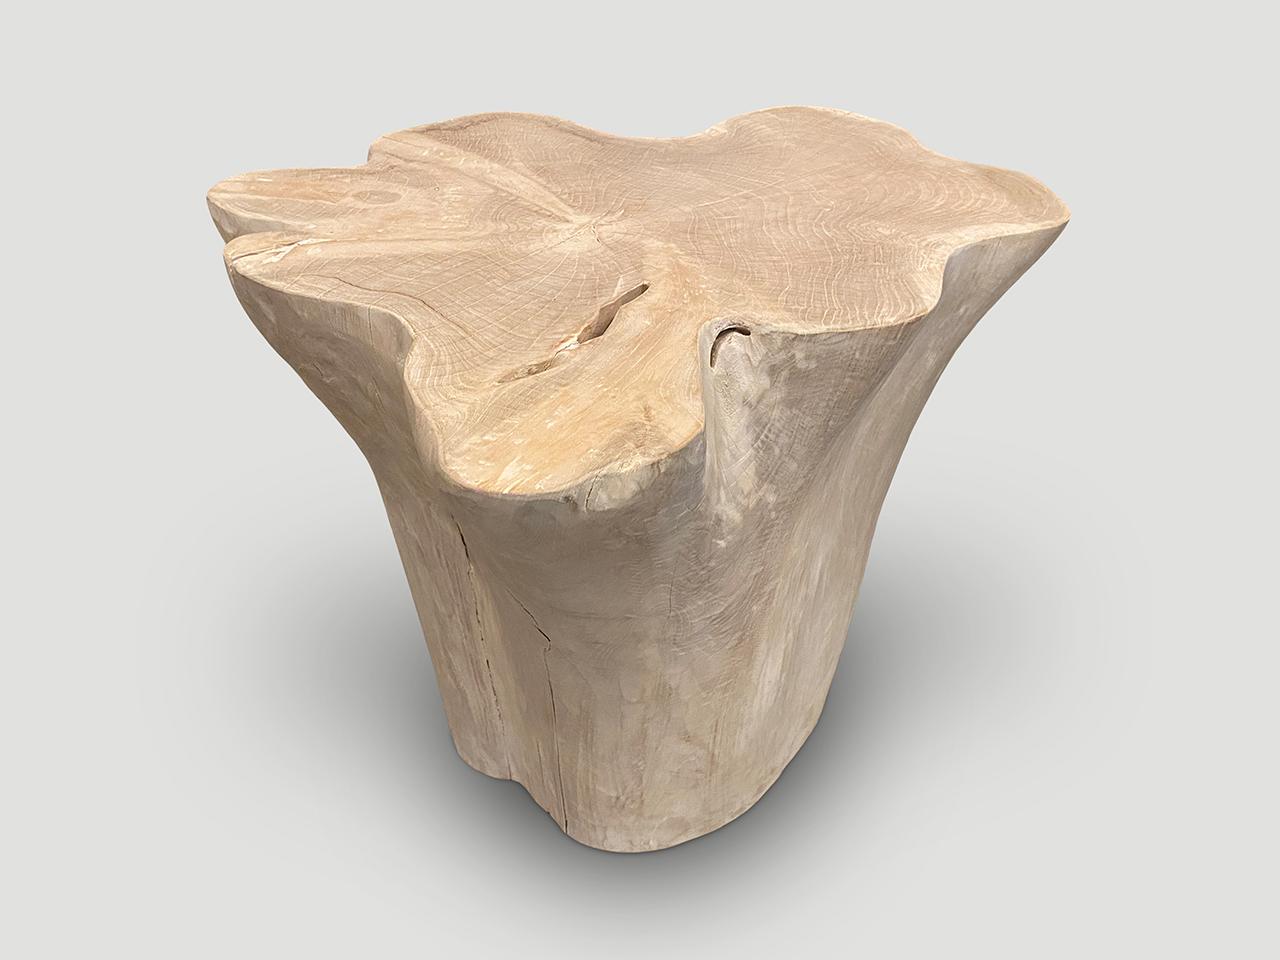 Amorphous reclaimed bleached teak side table or pedestal. A graduation from the bottom to the top at 13.5? x 11” on the bottom. 

The St. Barts Collection features an exciting new line of organic white wash, bleached and natural weathered teak